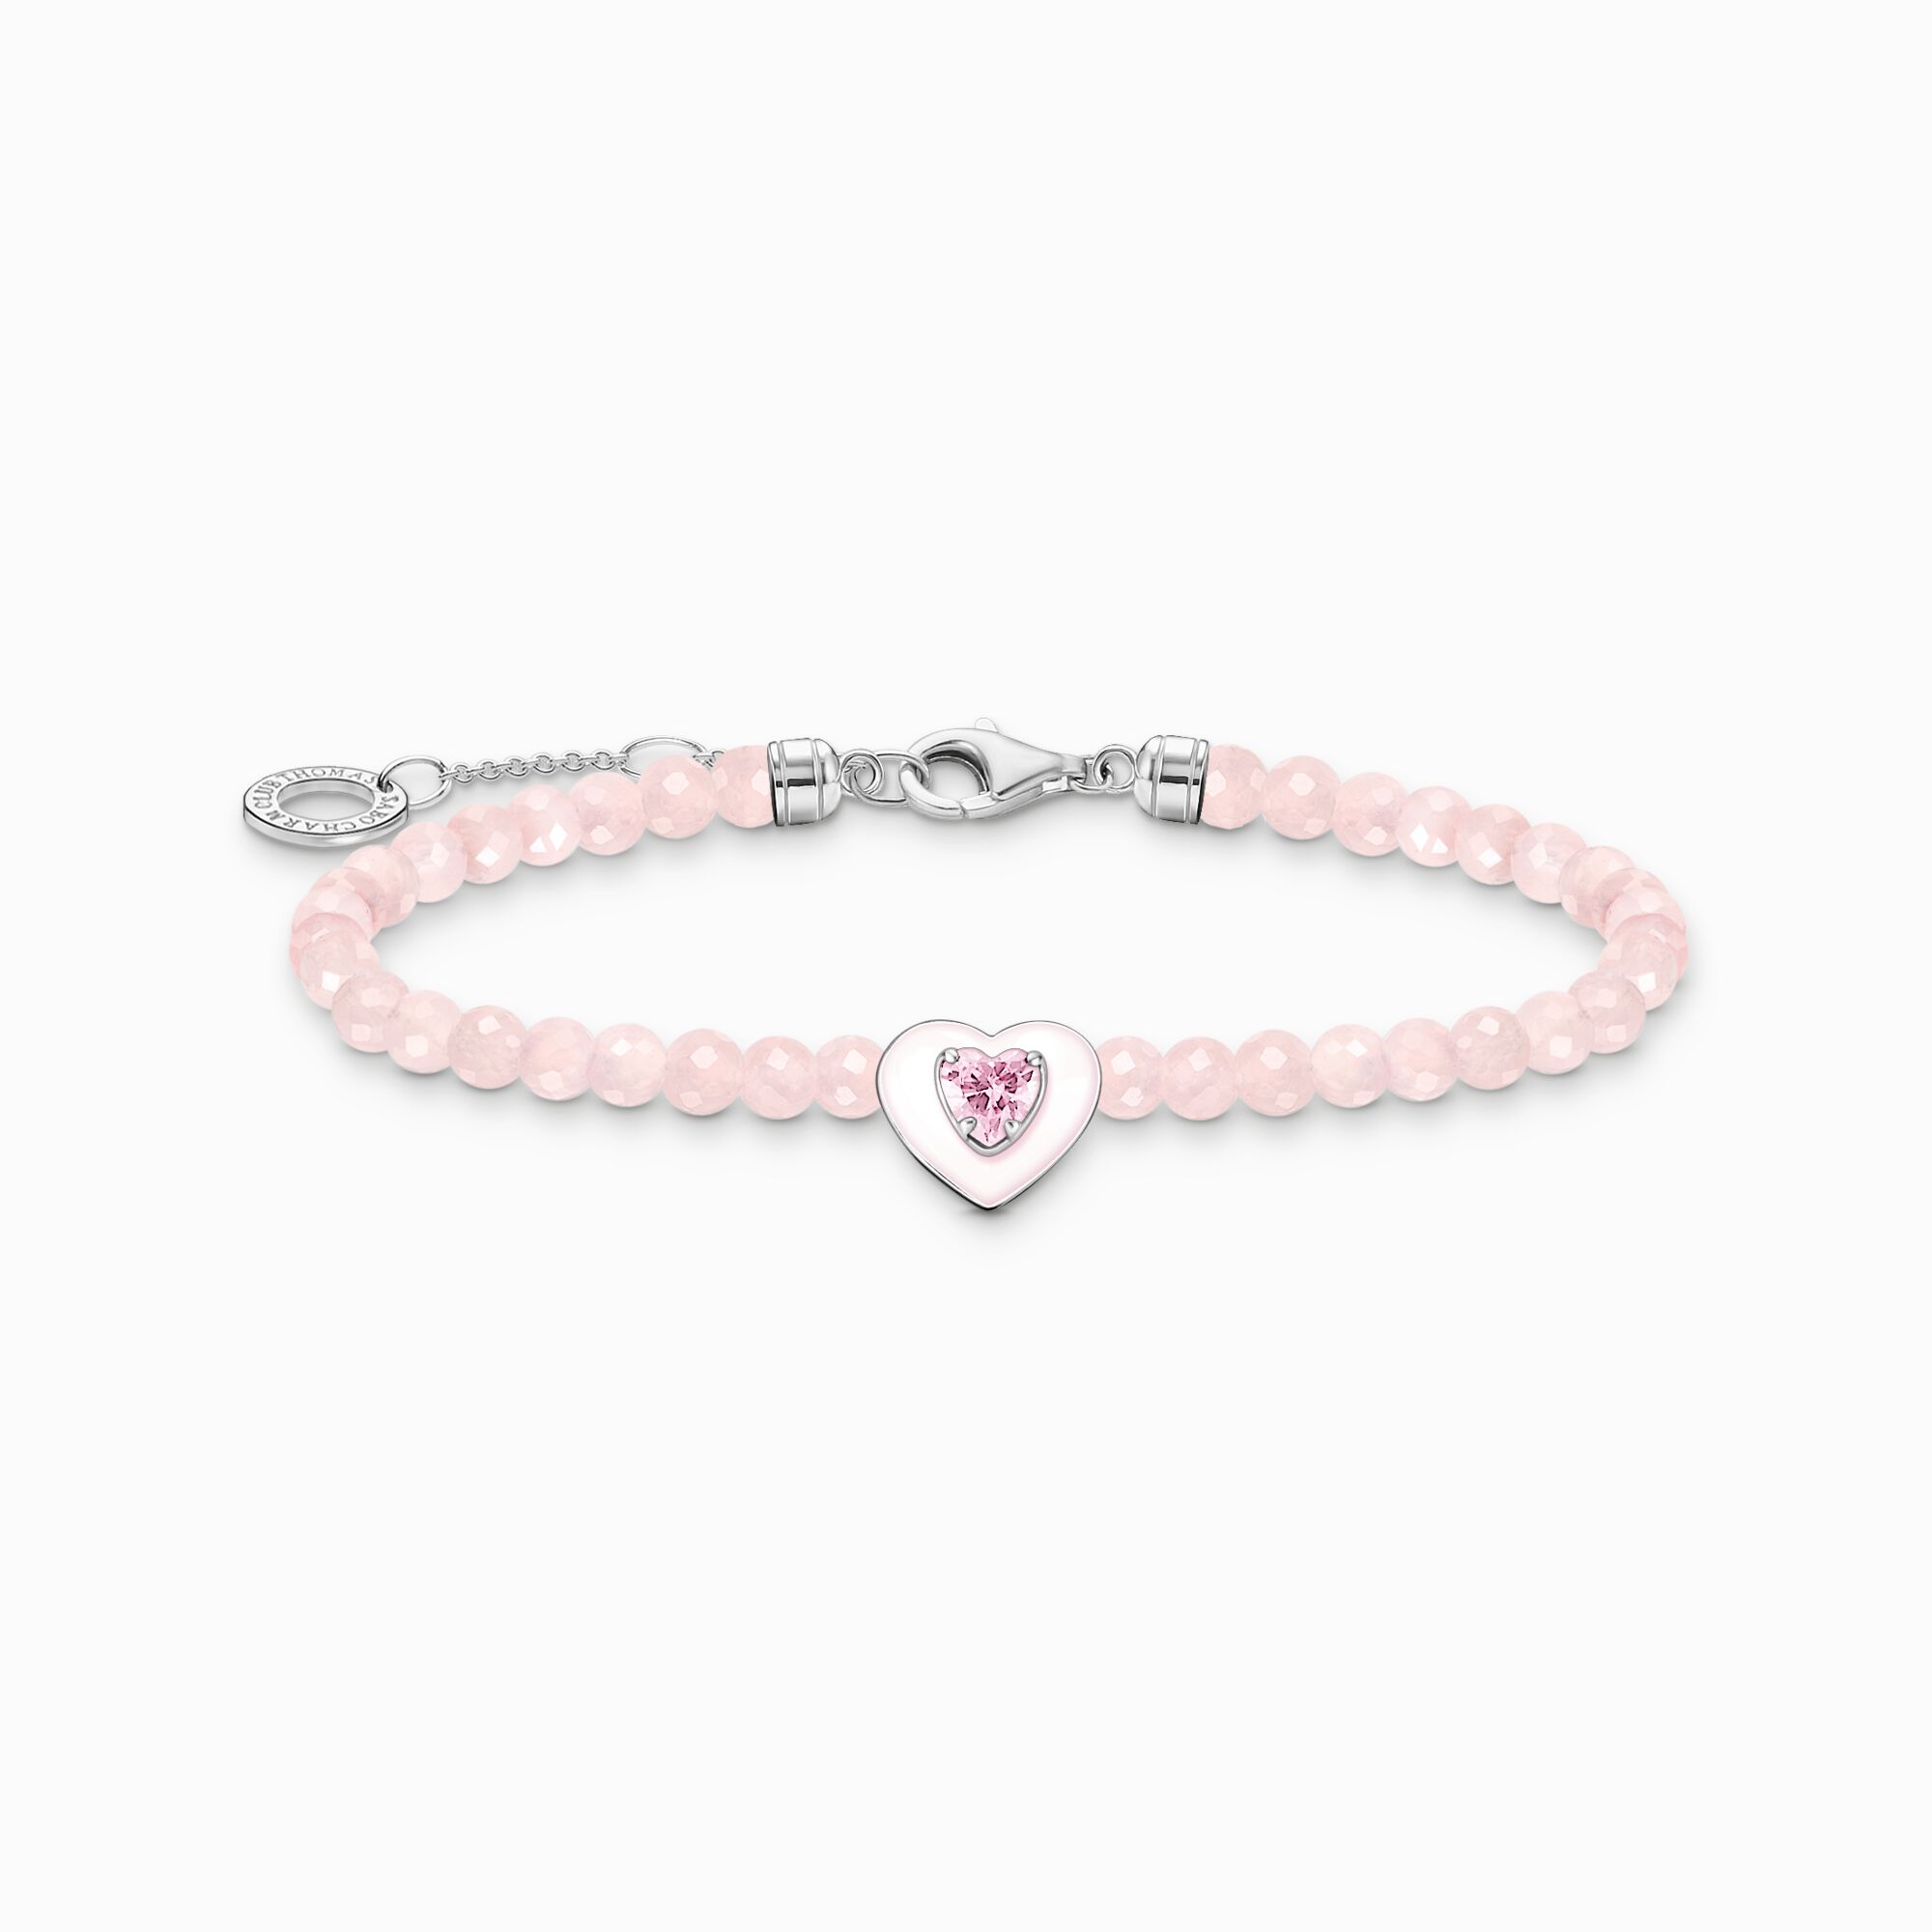 Bracelet heart with beads of rose quartz from the Charming Collection collection in the THOMAS SABO online store